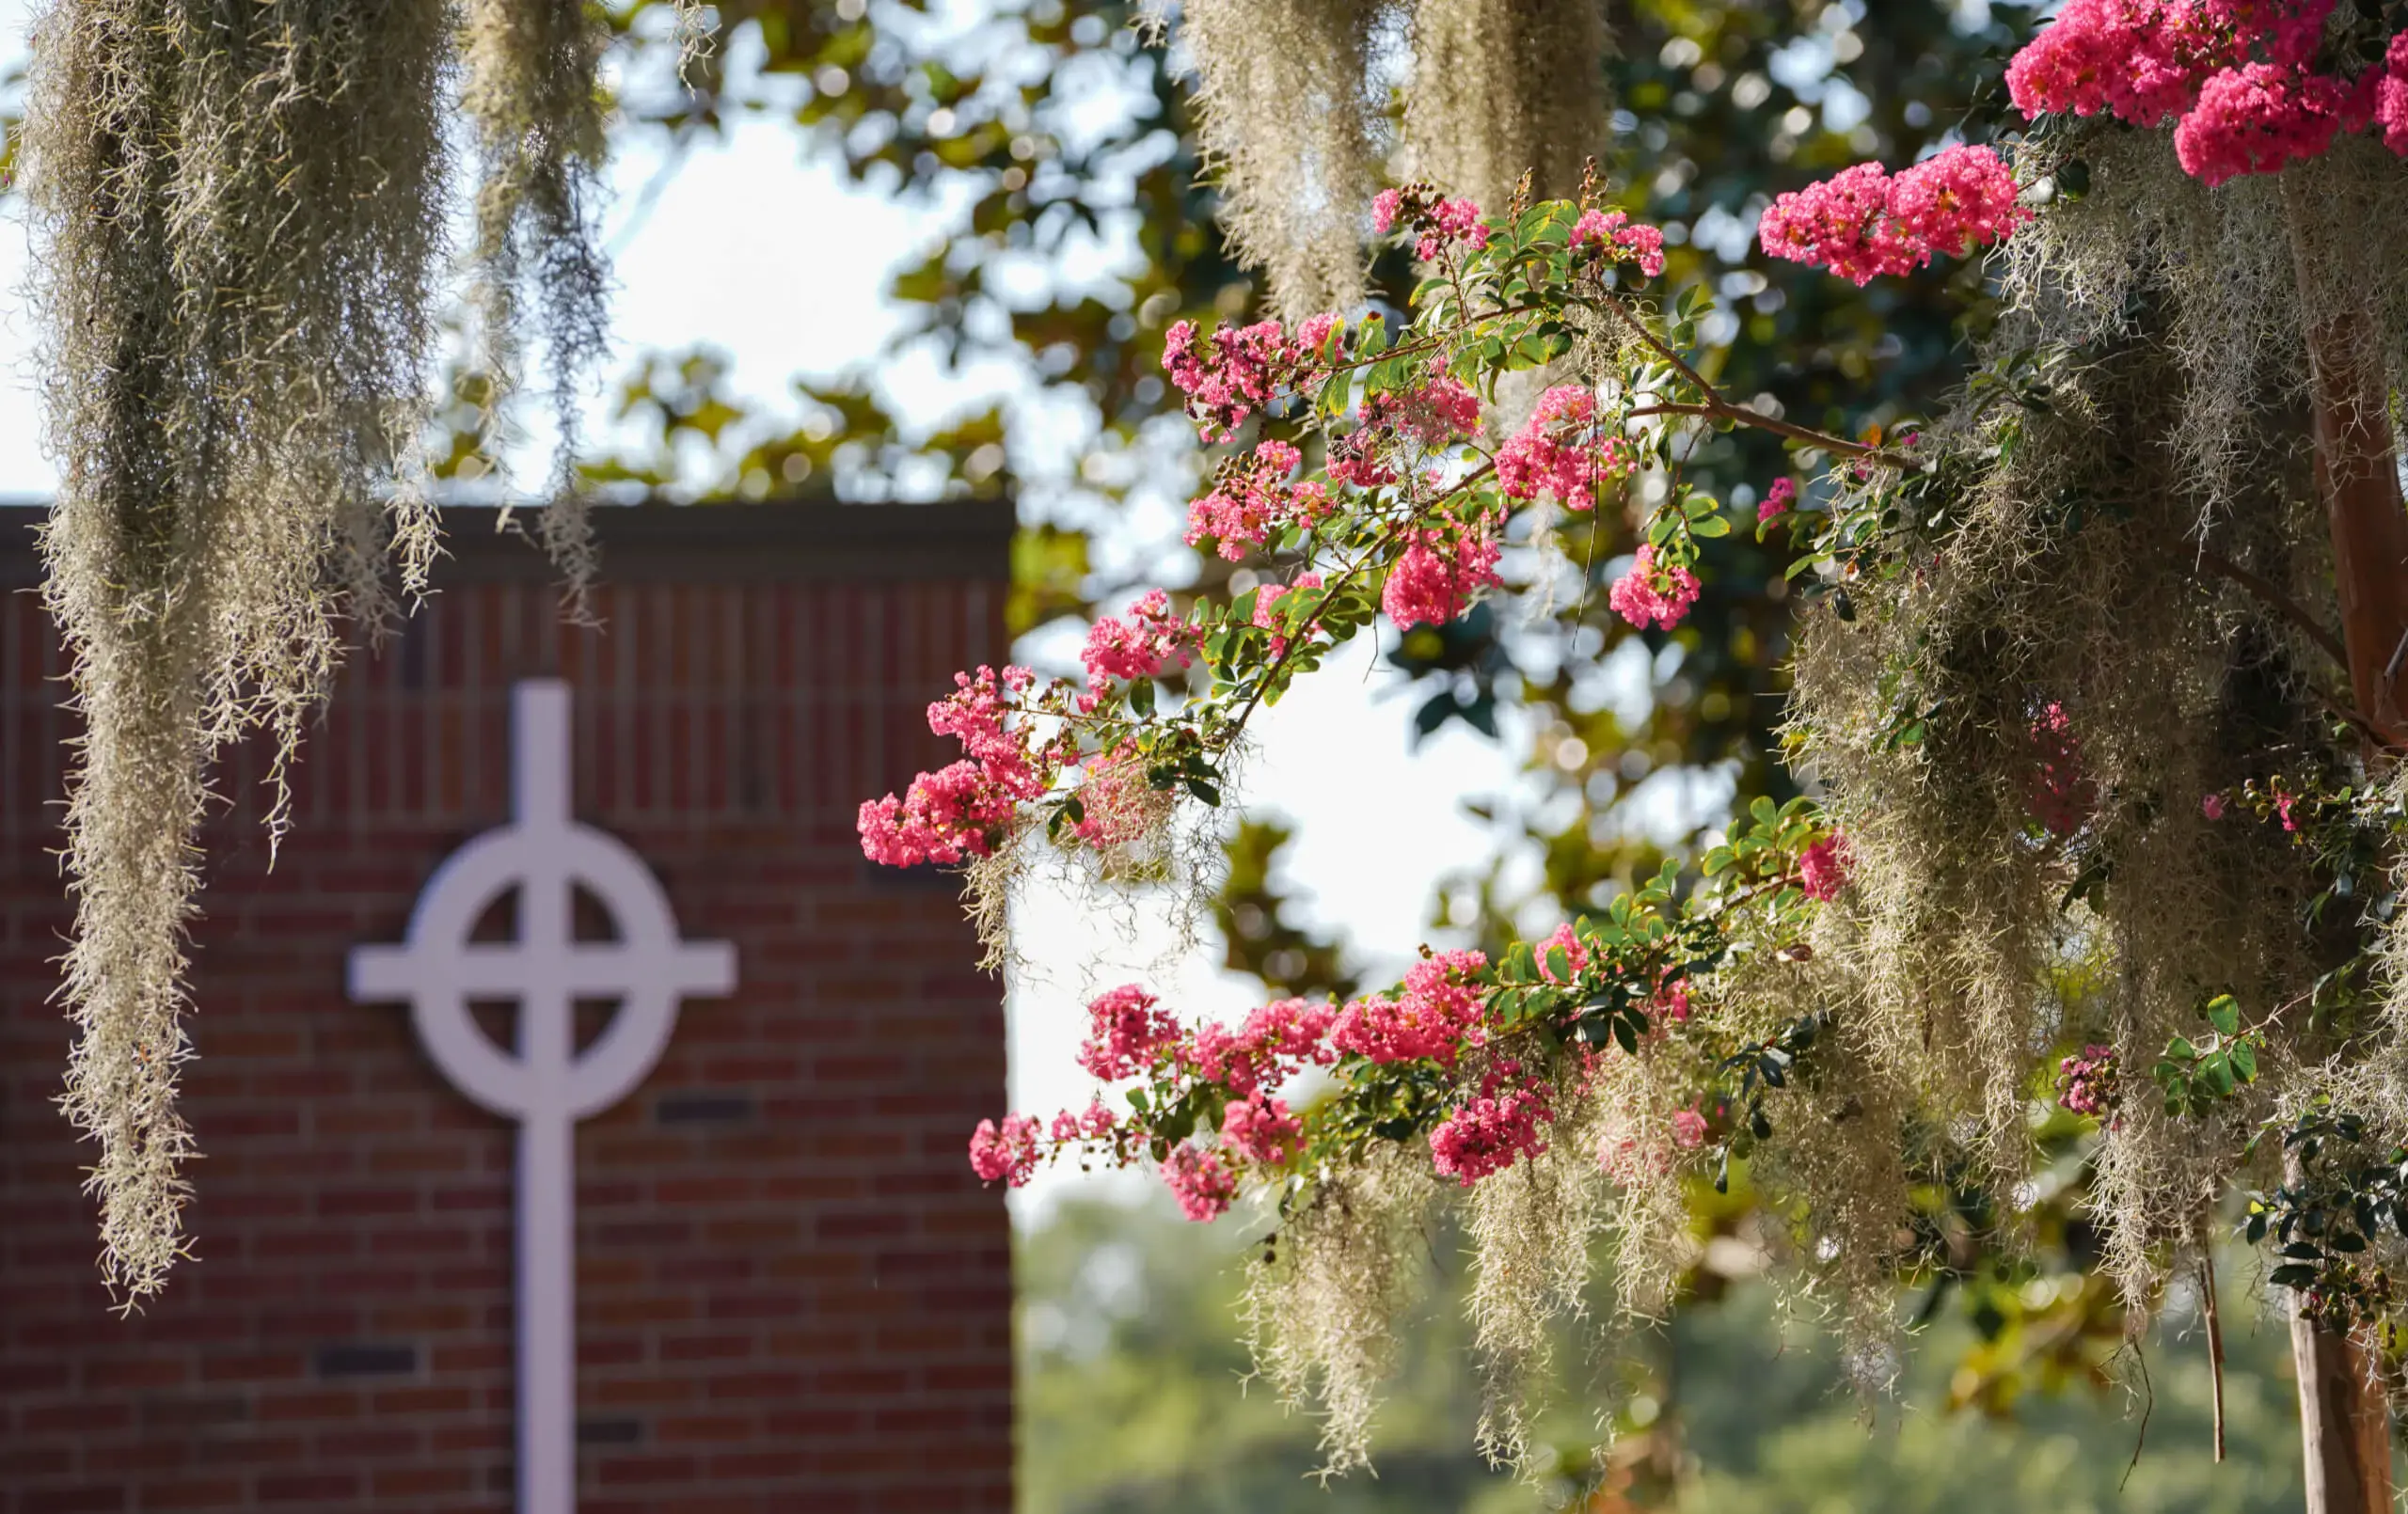 Porter-Gaud campus with cross and blossoms